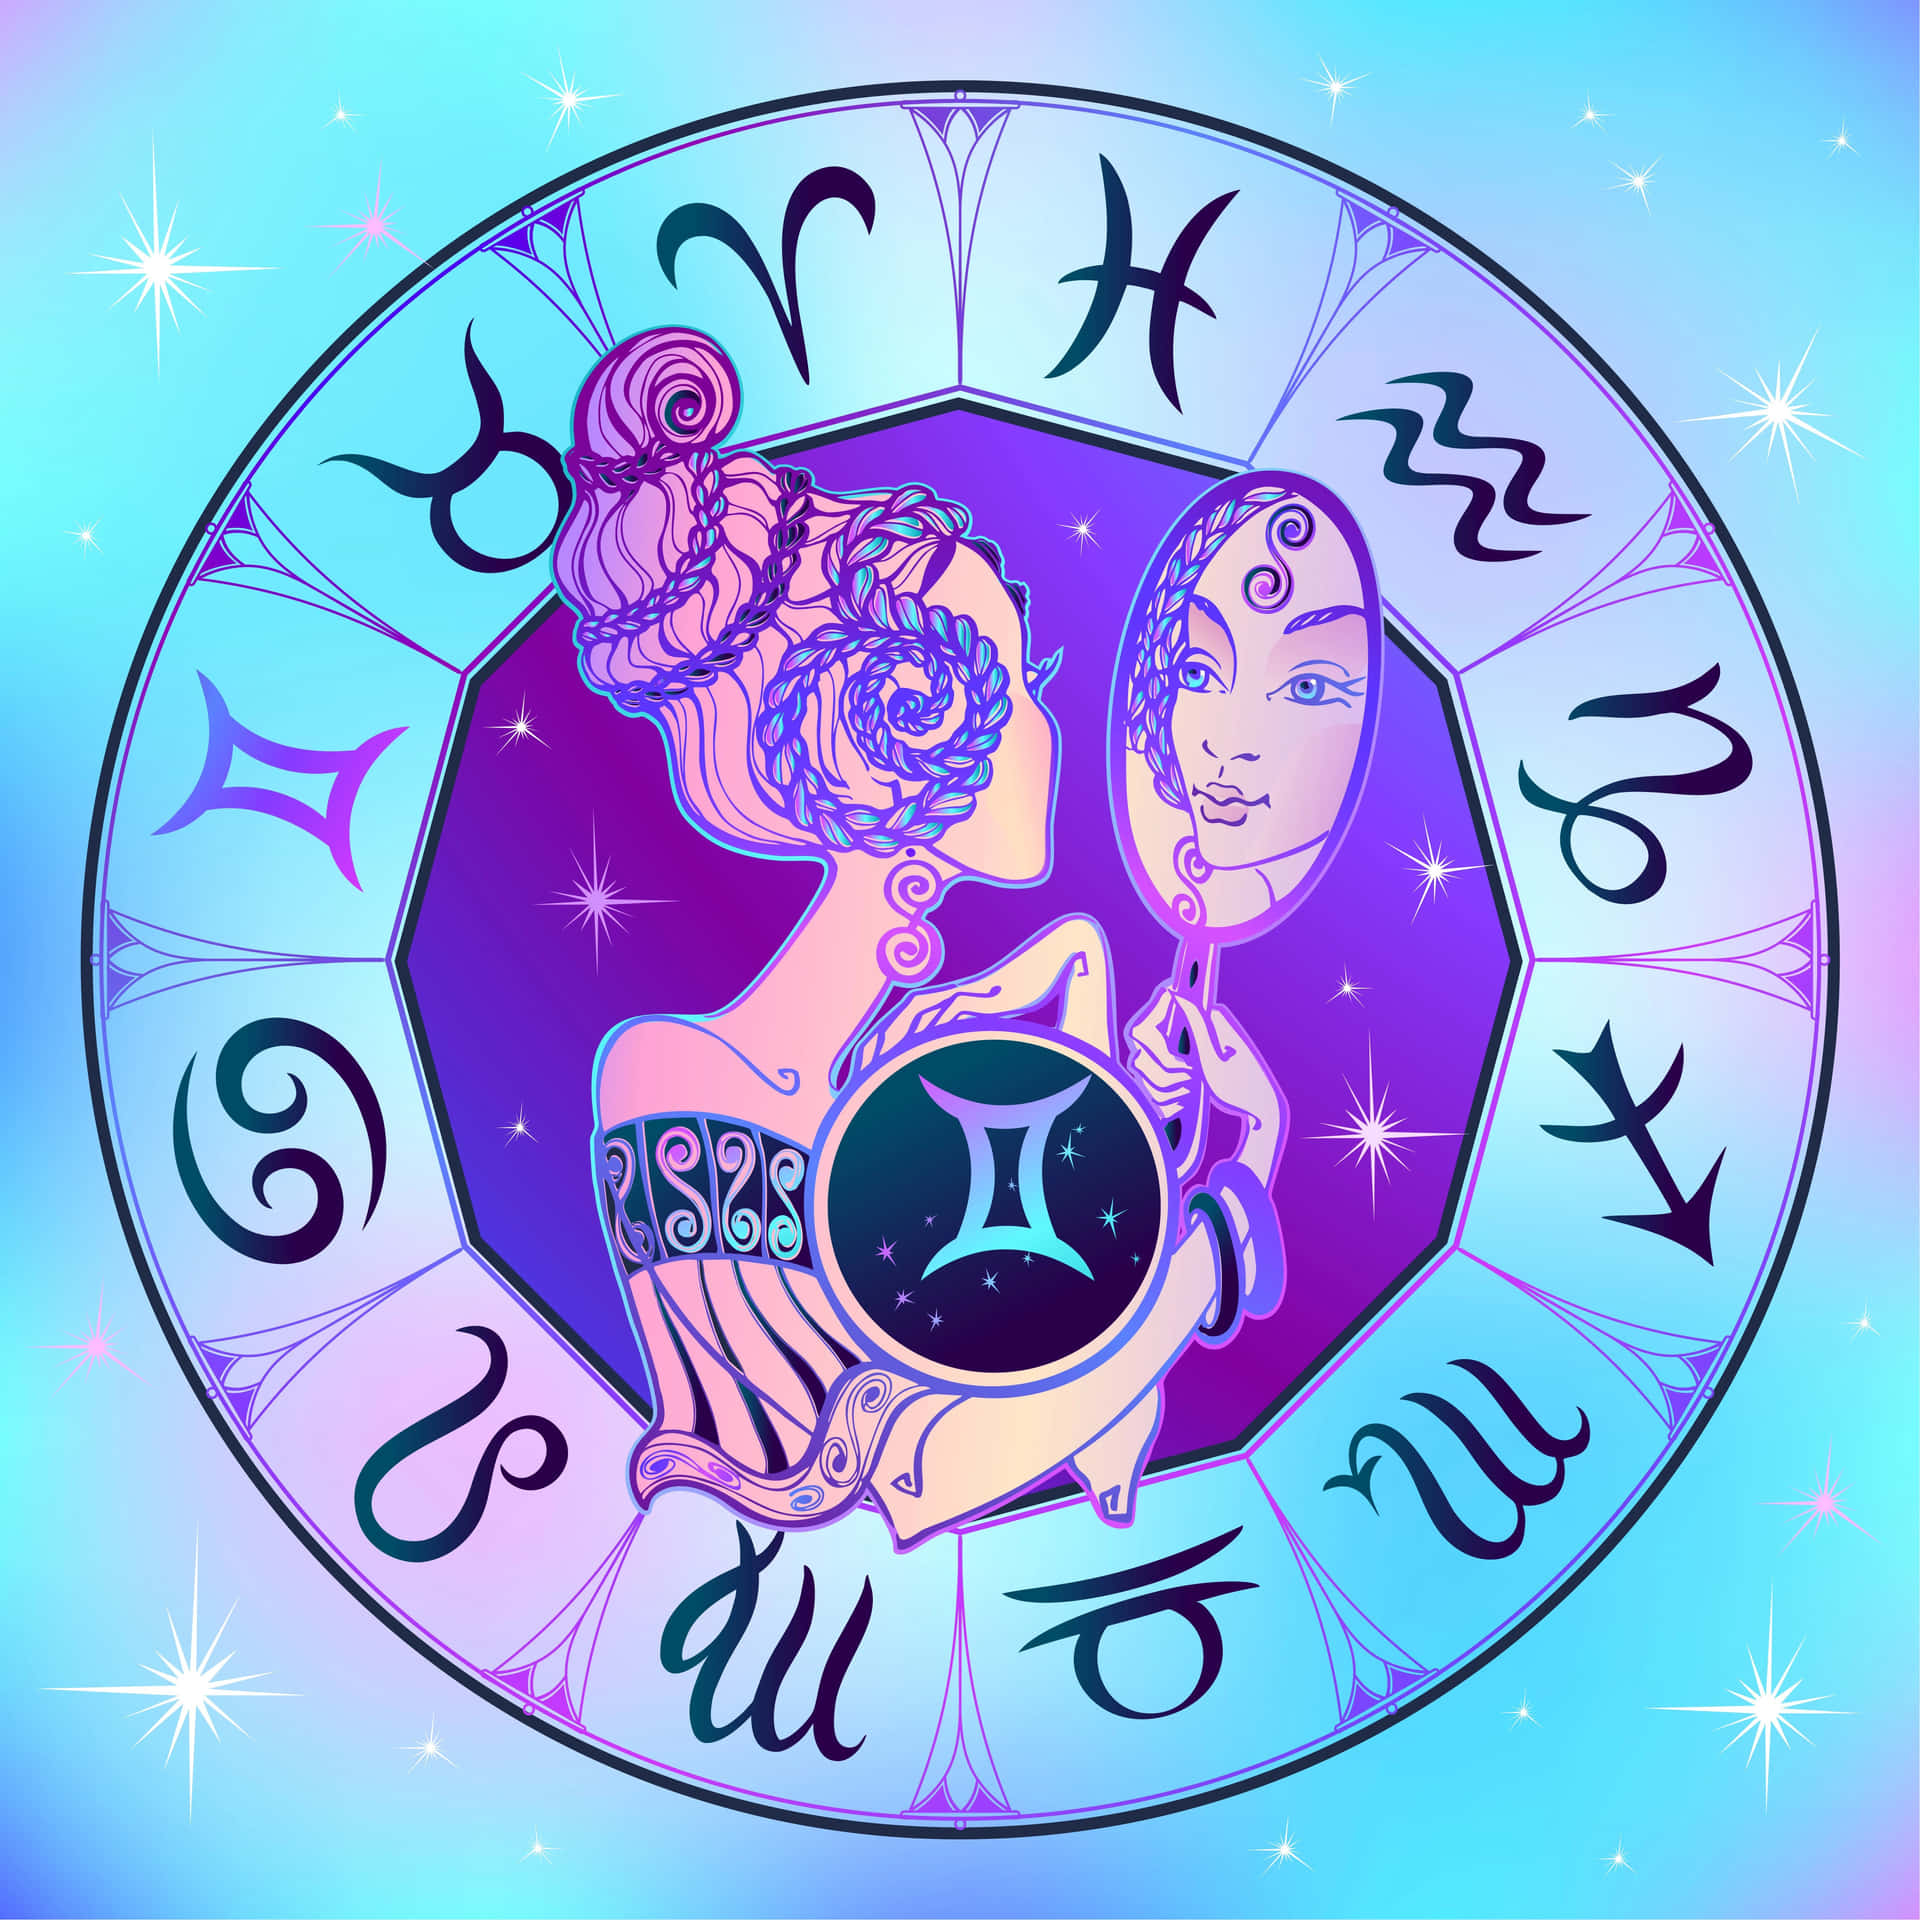 A Zodiac Sign With A Woman In The Center